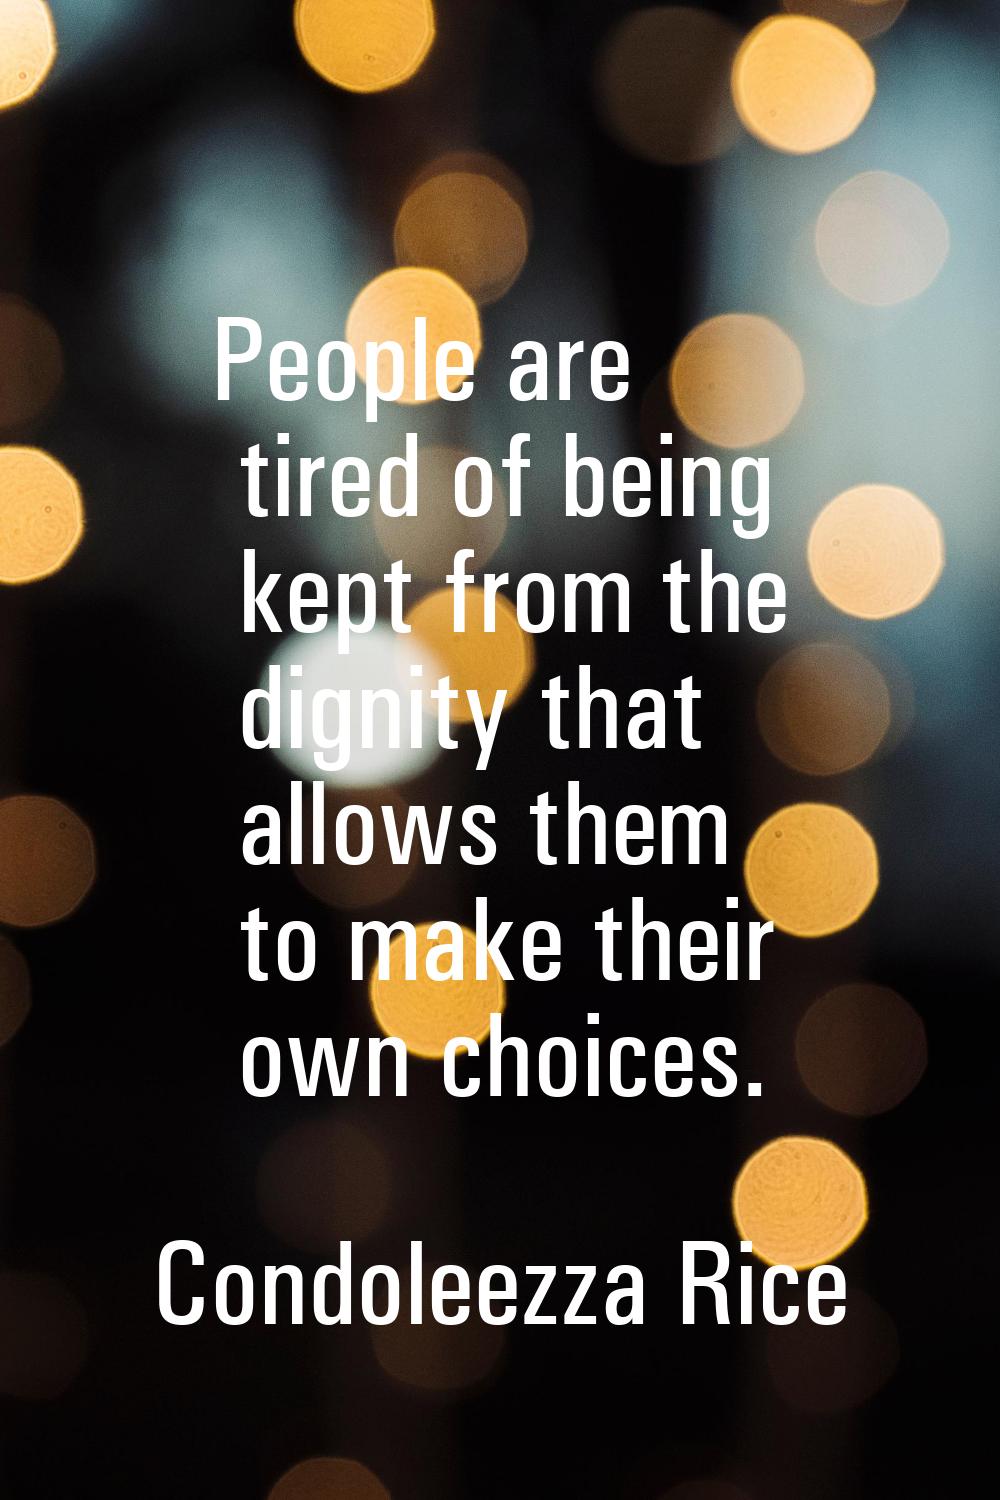 People are tired of being kept from the dignity that allows them to make their own choices.